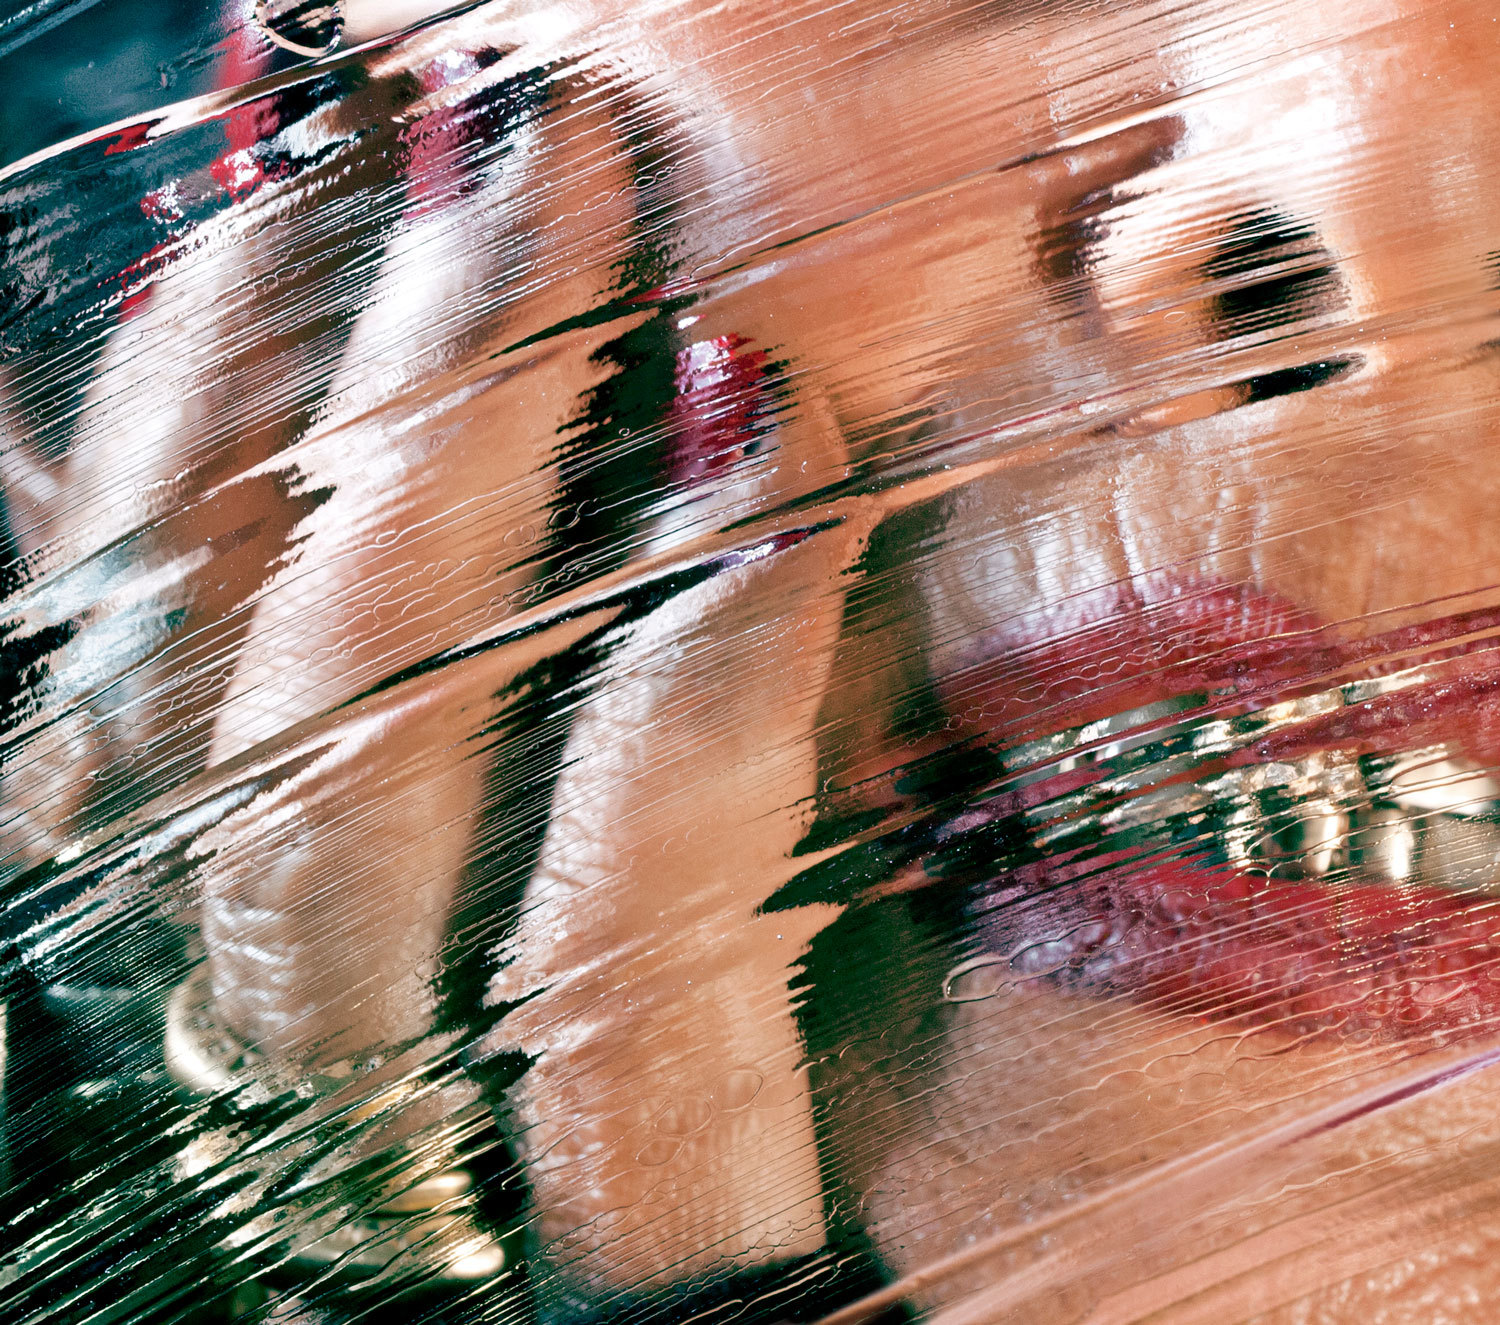 marilyn minter's art is literally filthy gorgeous